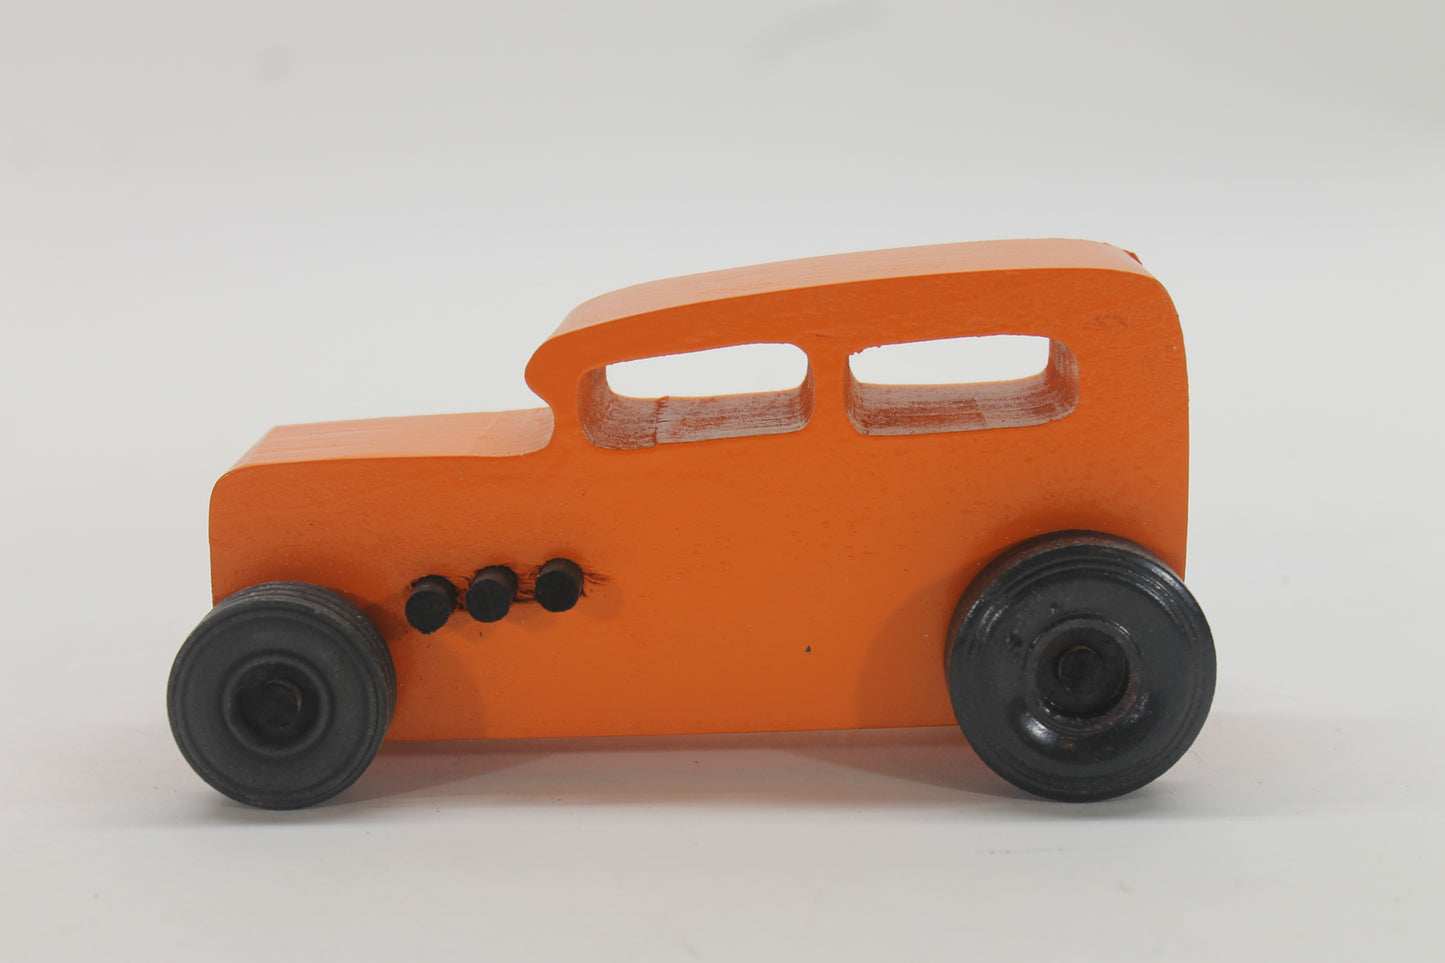 Wooden toy Ford hot rod set, 3 cars, painted yellow, red, and orange with black tires.